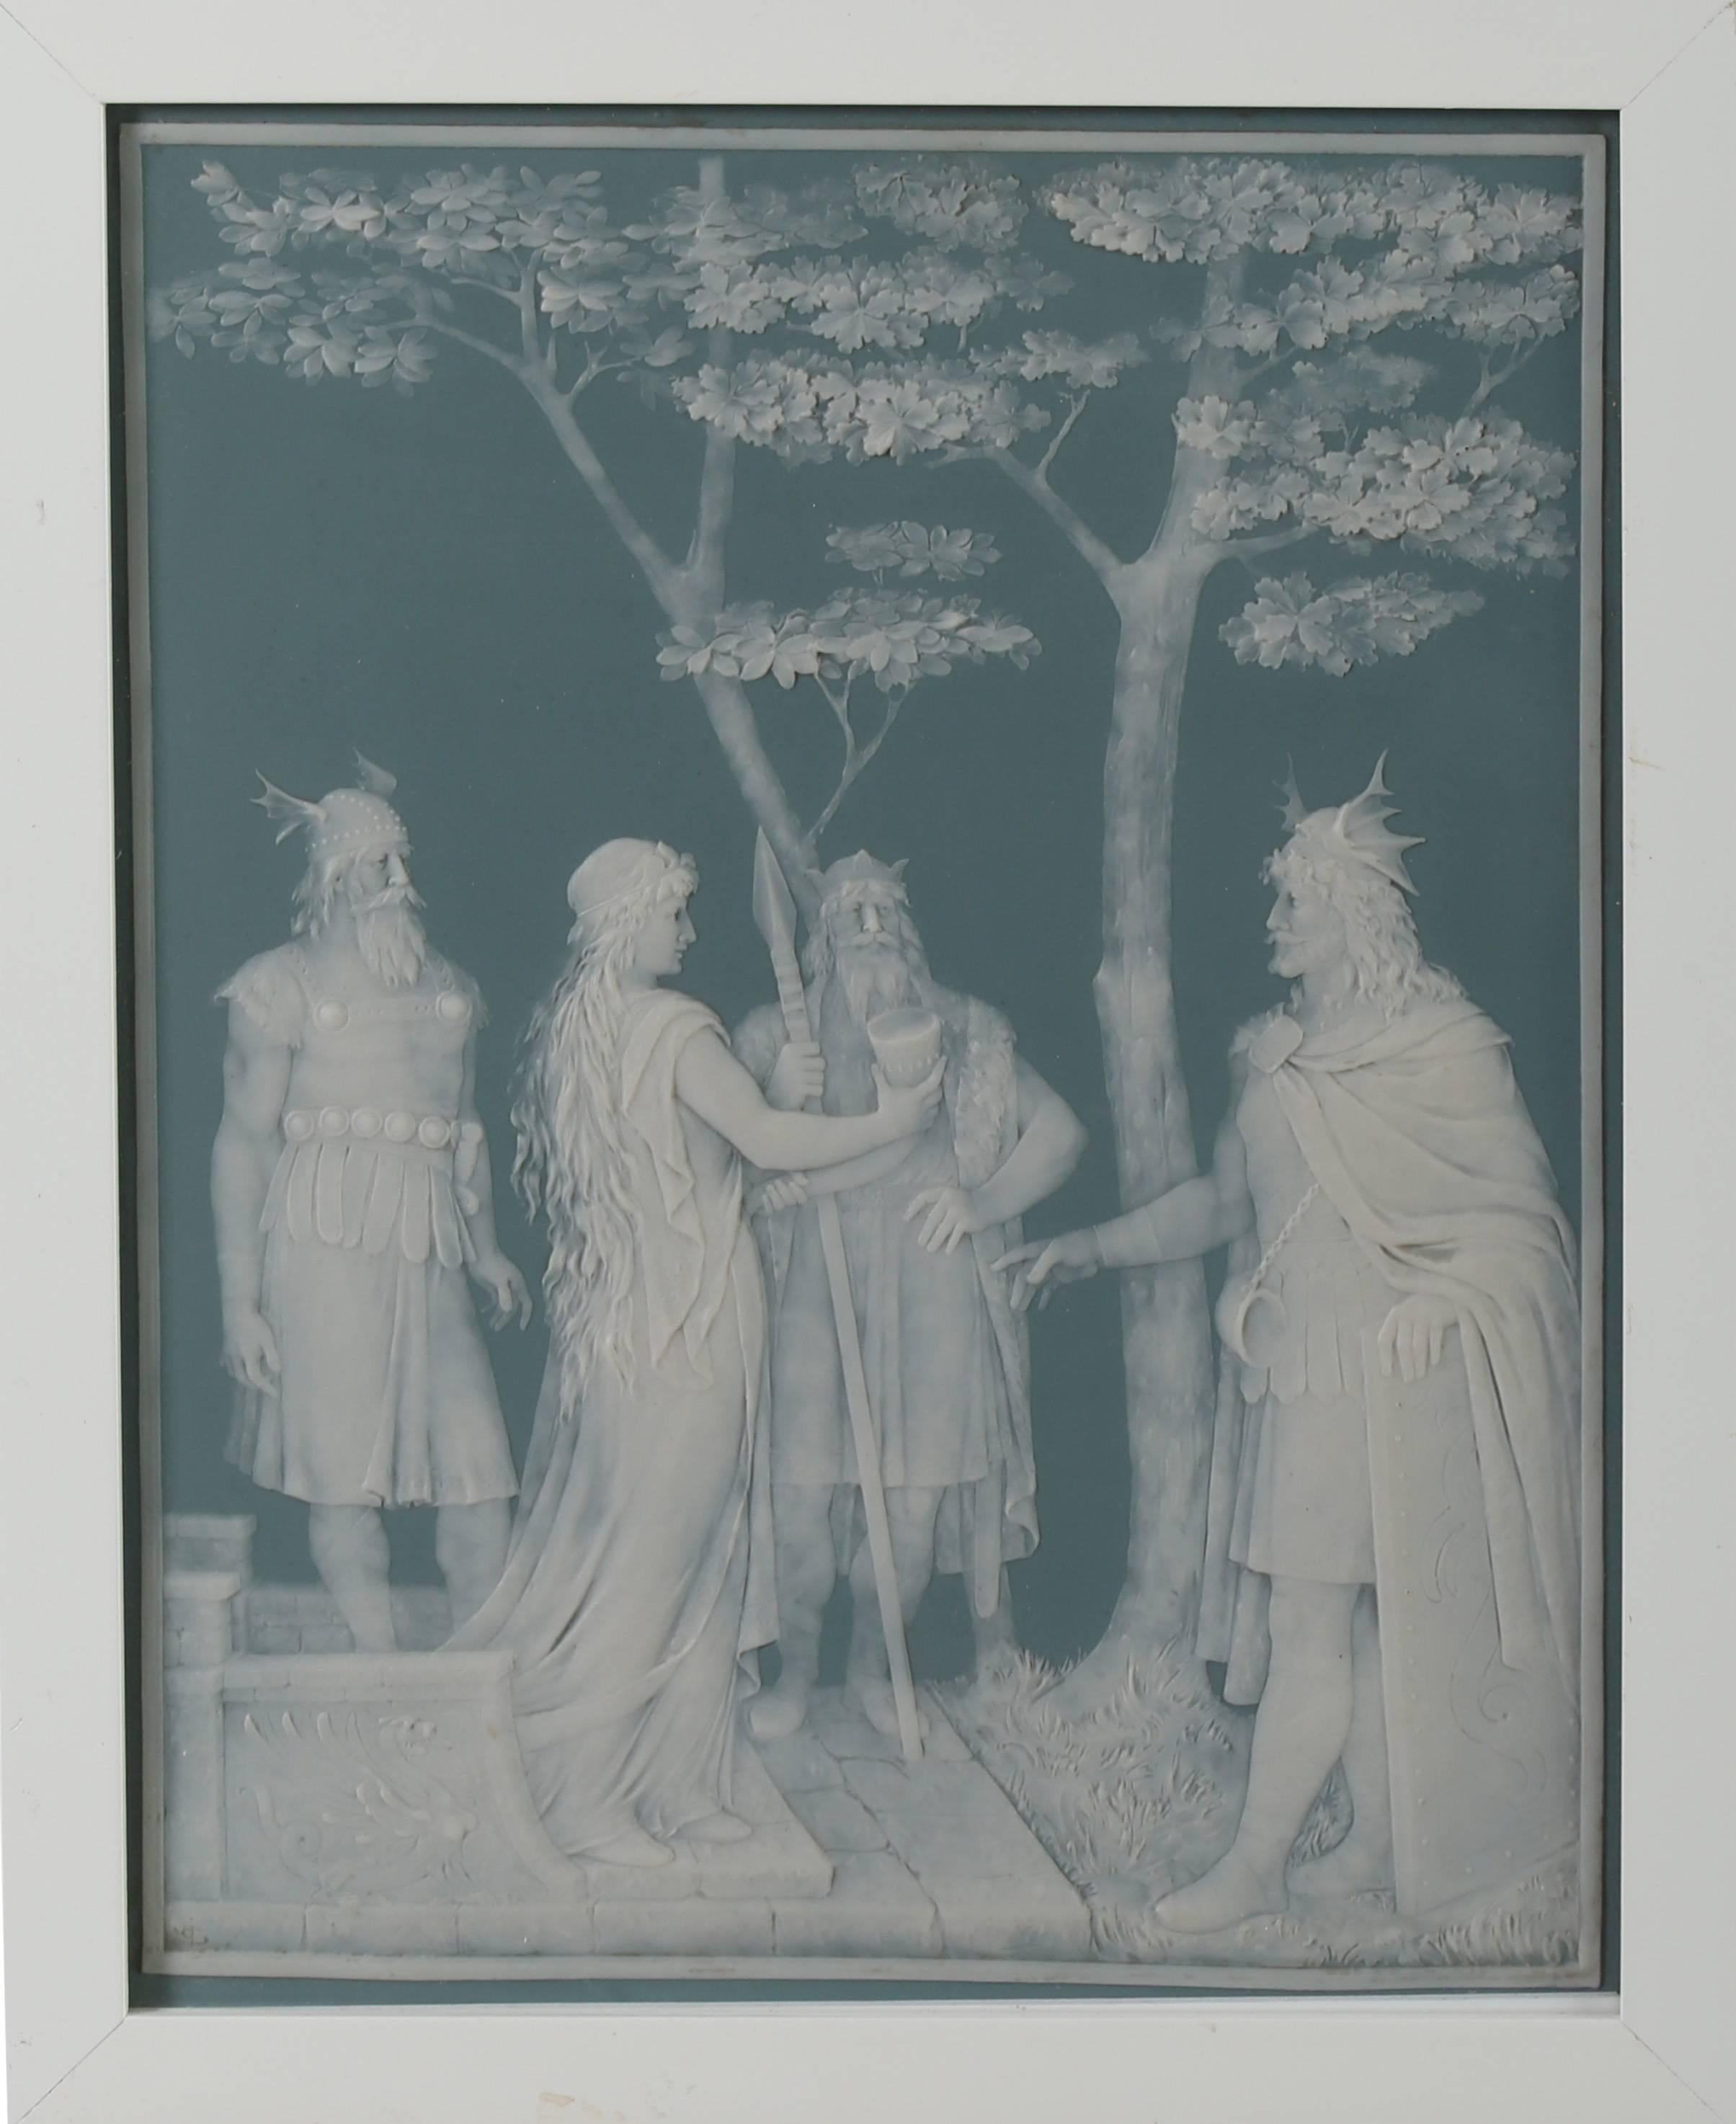 Two beautiful individual Phanolith plaques made in Mettlach, Germany by Villeroy and Boch. Design by Johan Baptiste Stahl. The white and green cameo plaque on the left is of Norse Gods (Scene from opera Lohengrin), signed Stahl on the front and